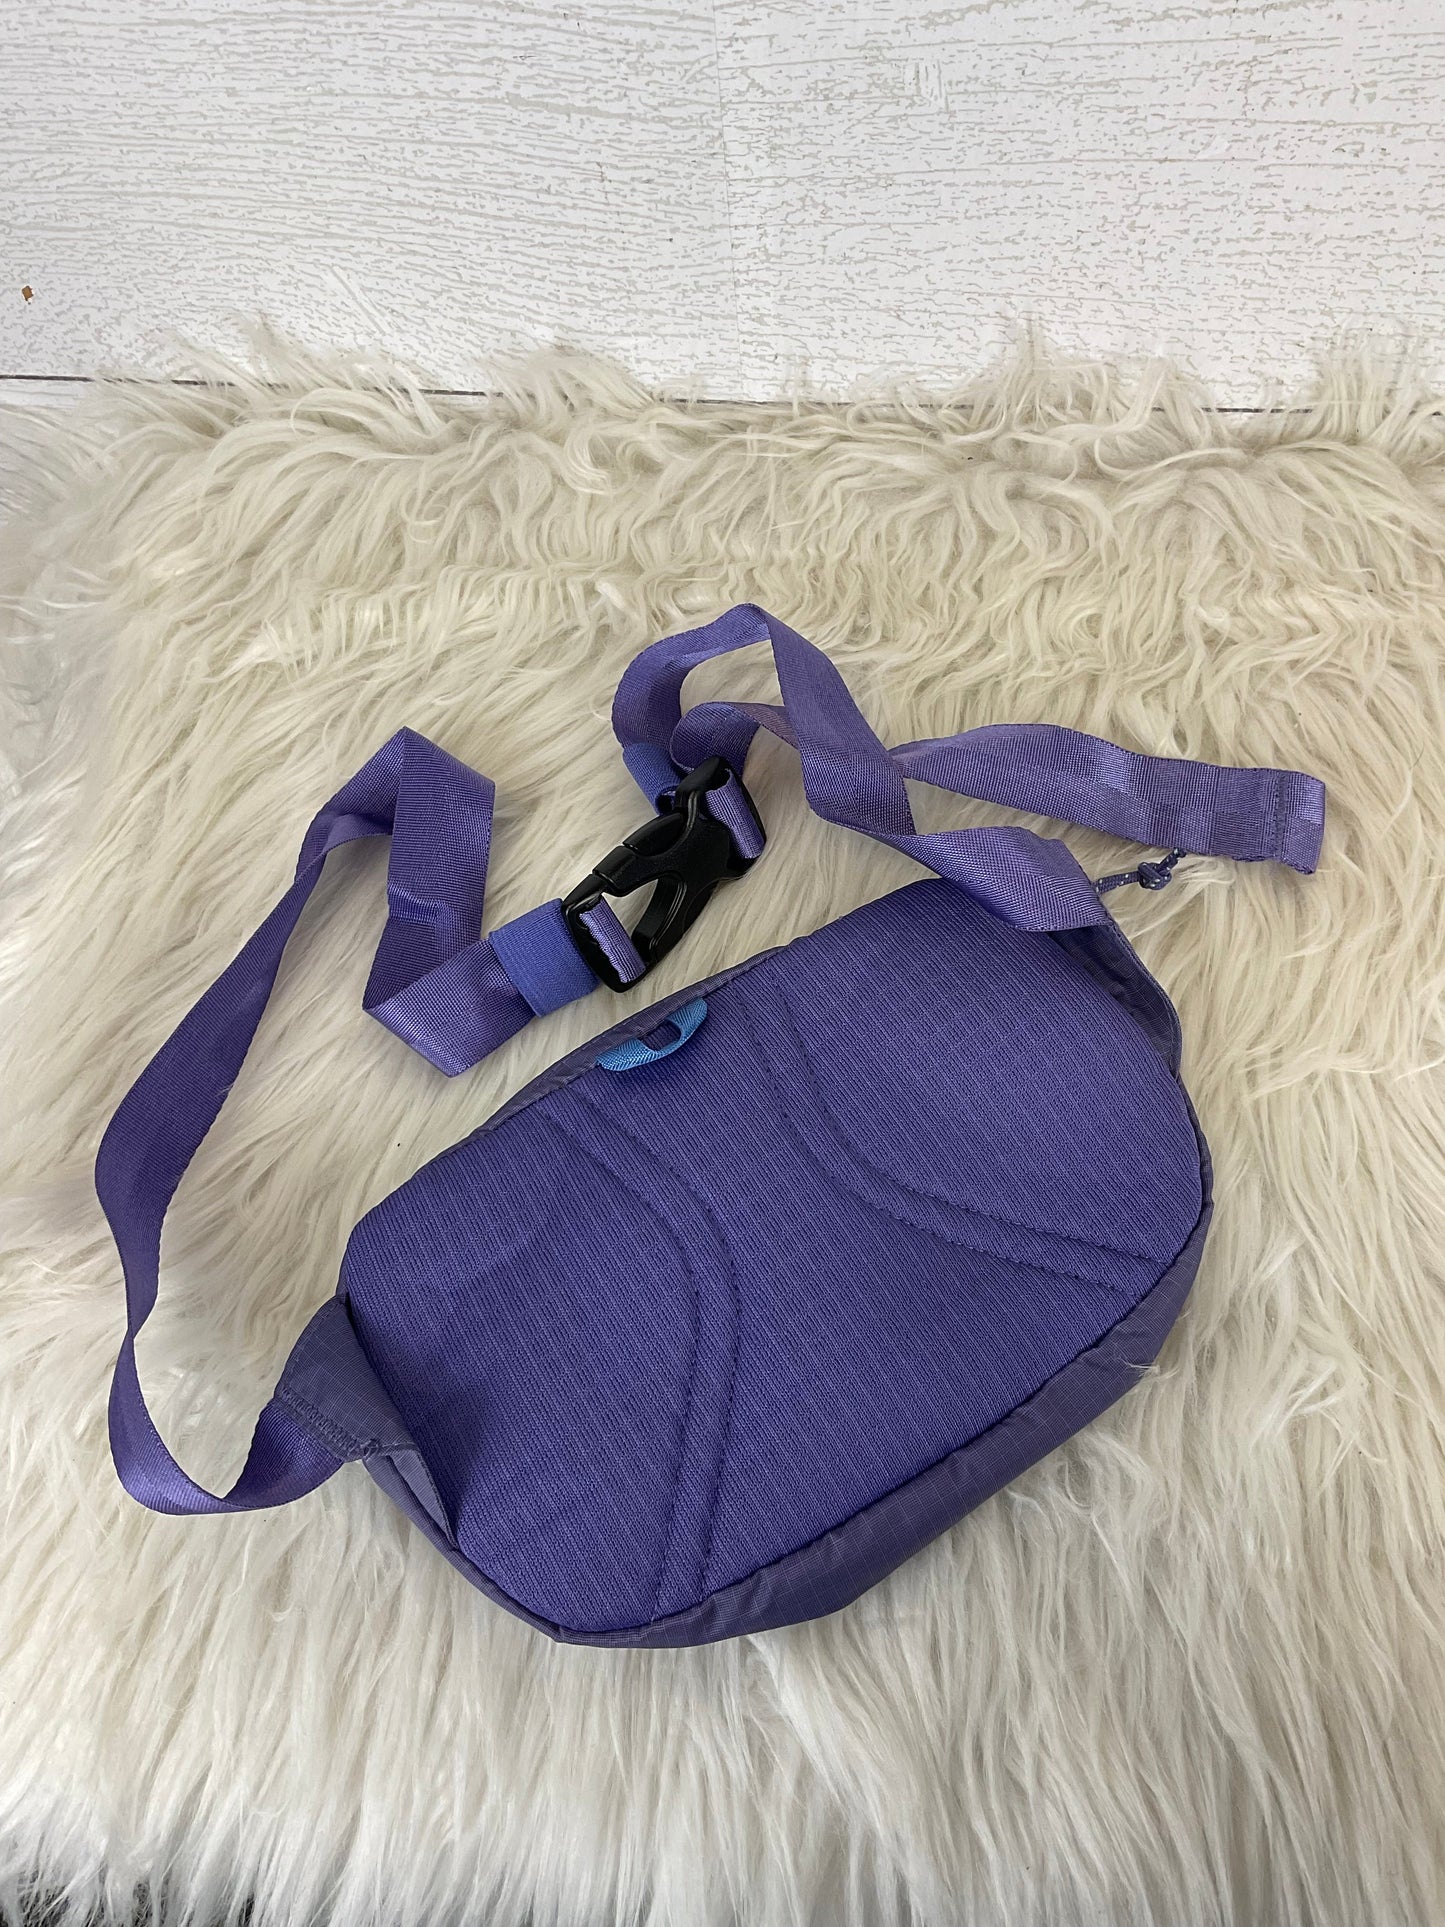 Belt Bag By Patagonia  Size: Small